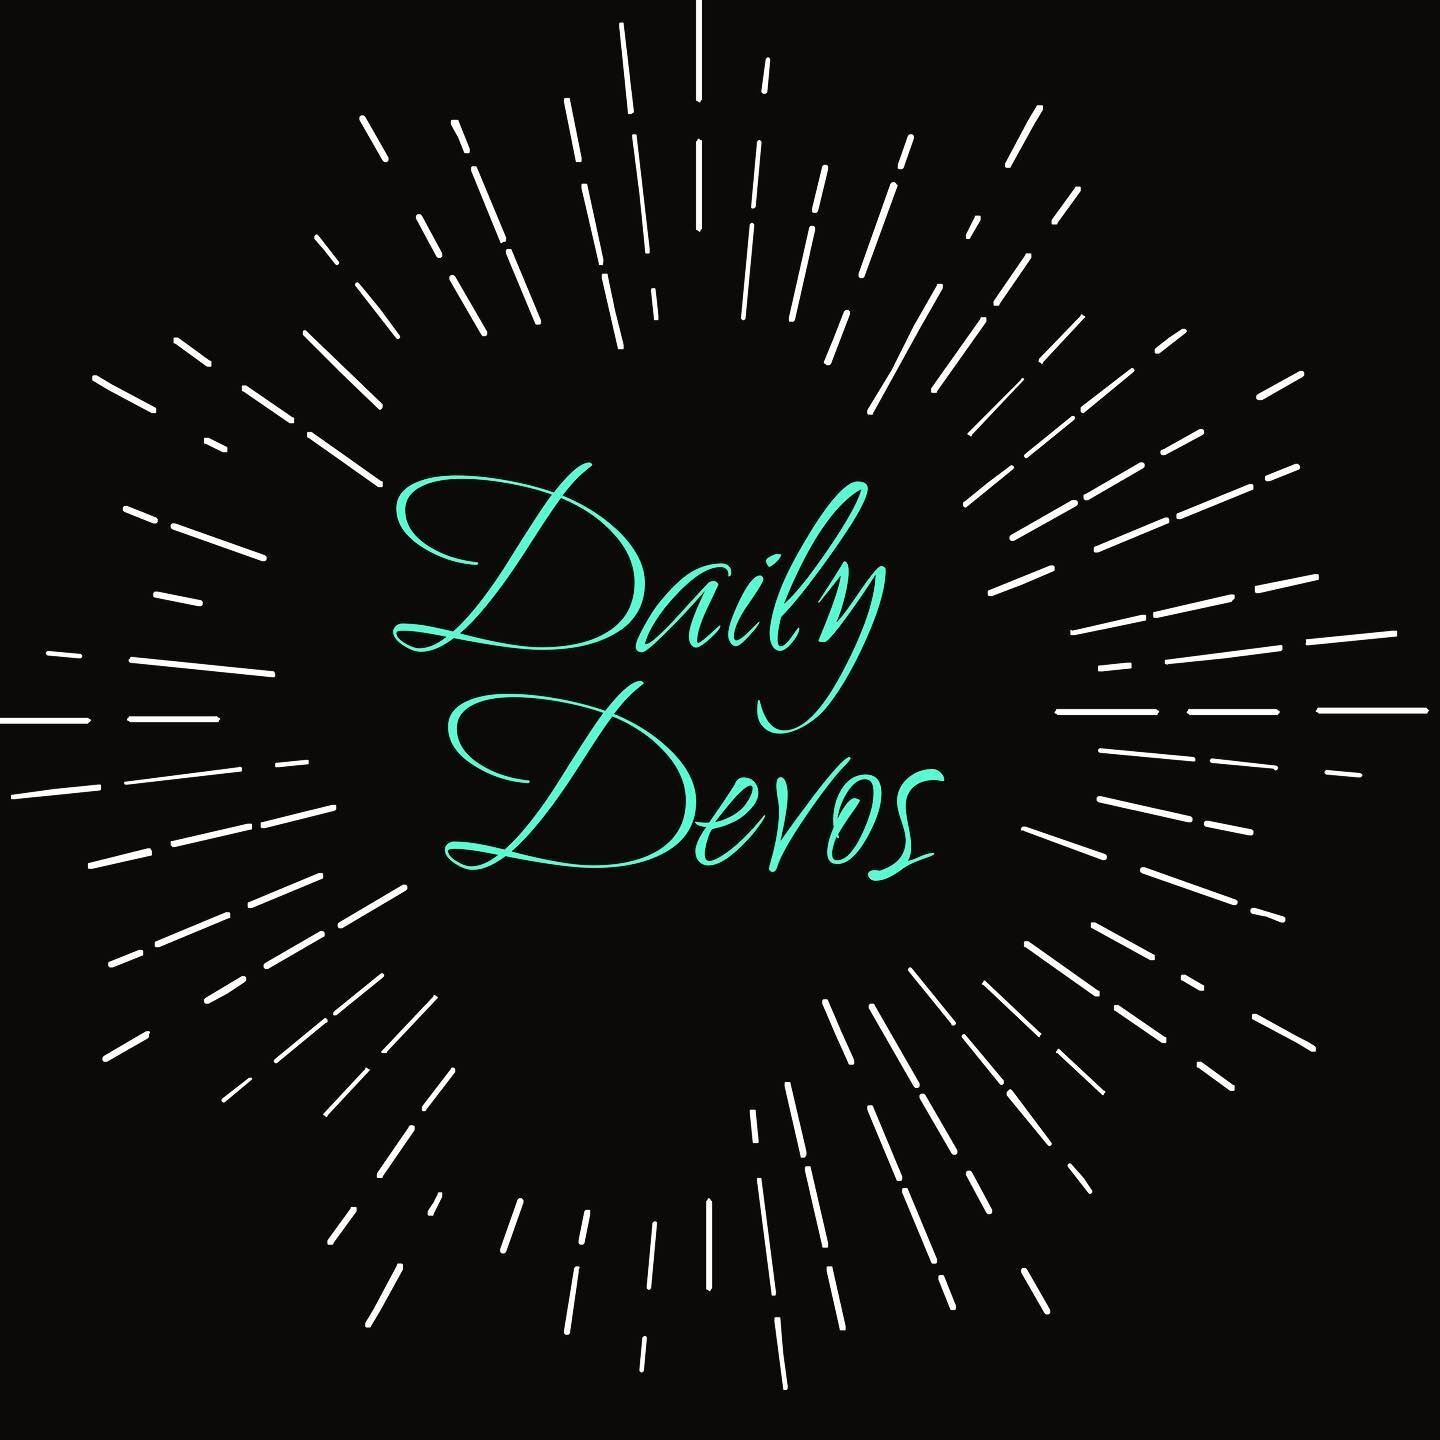 If you&rsquo;d like to join a Daily Devotional group DM me! Devotionals are something that has always helped me center myself when things feel a little chaotic. You can join a group with just me or let me know who else you&rsquo;d like to be in a gro